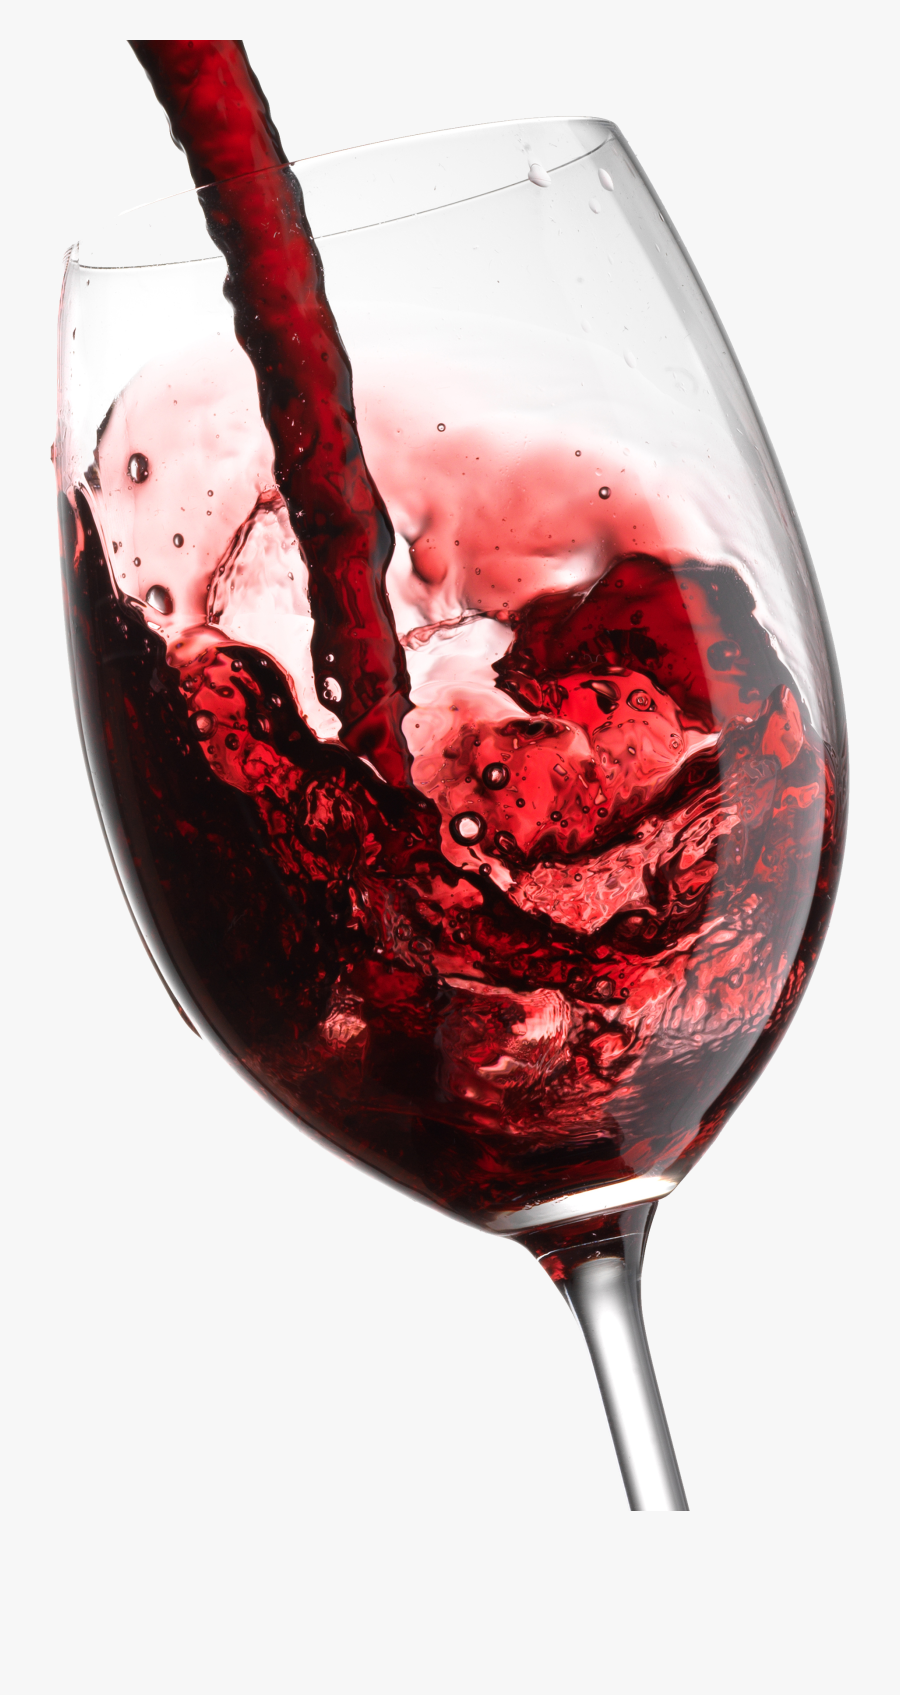 Wine Glass Png Image, Transparent Clipart